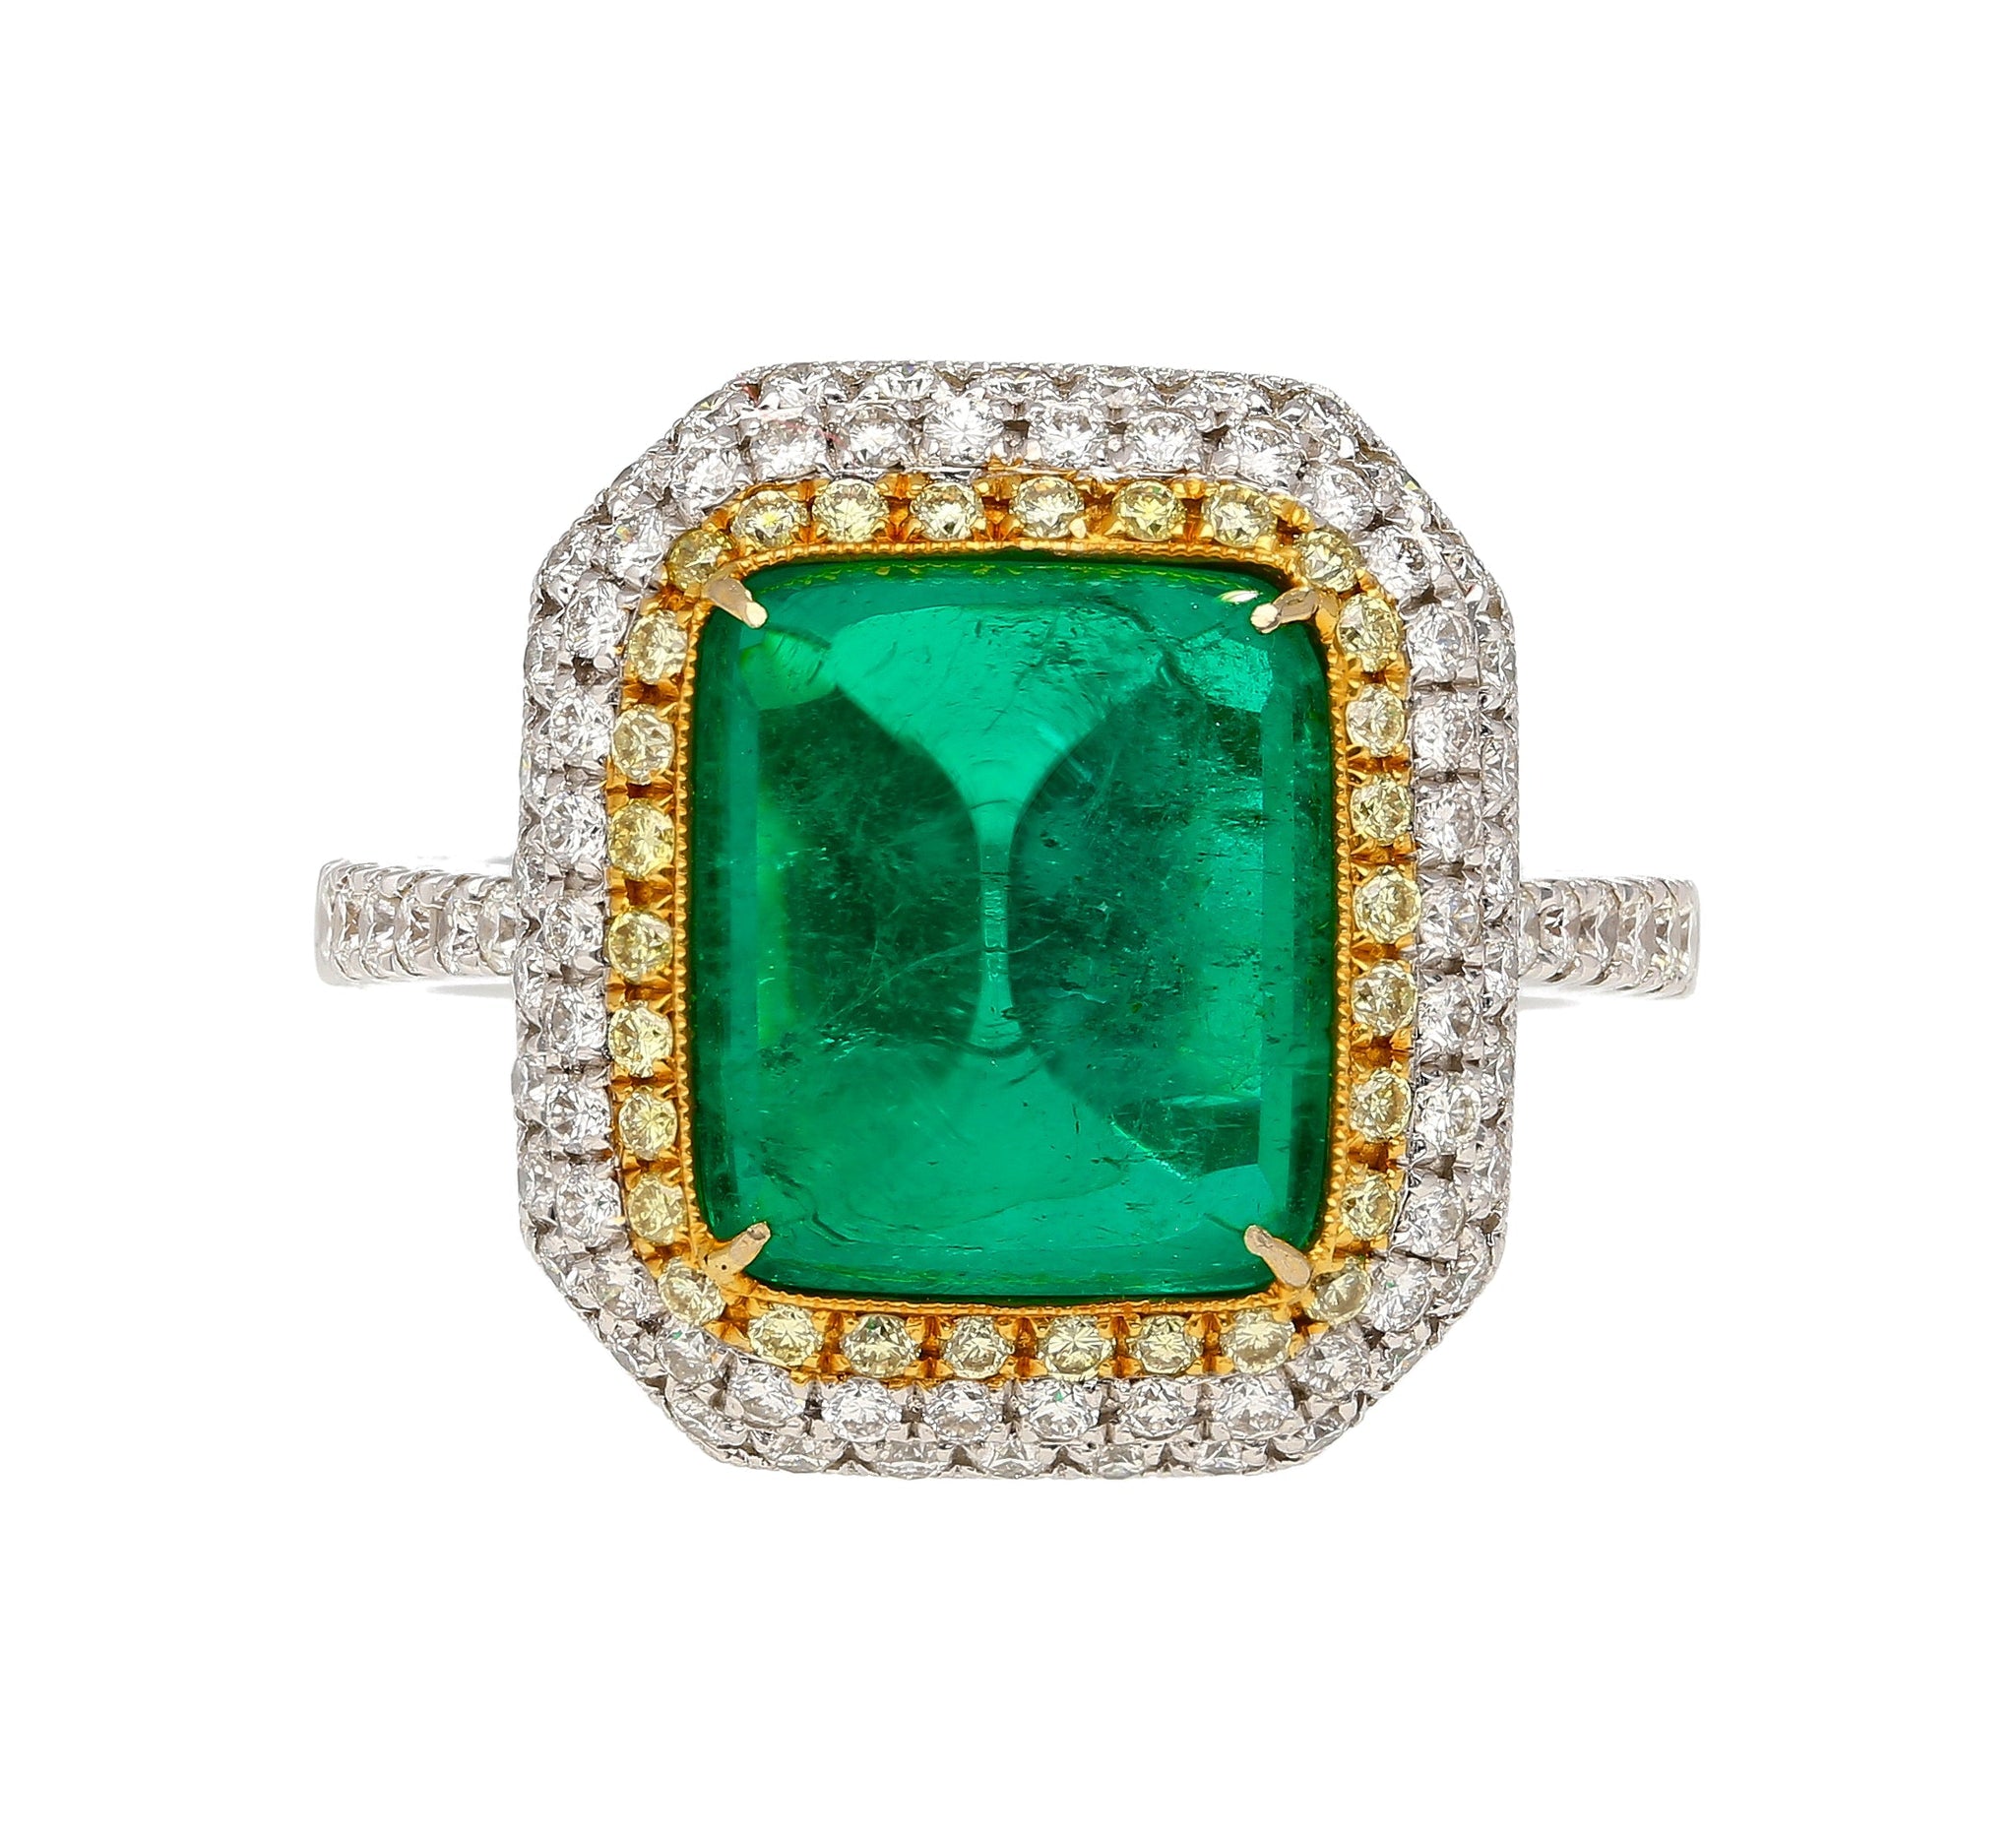 4.49 Carat Sugarloaf Cabochon Cut Colombian Emerald and Diamond Halo Ring in 18k White Gold